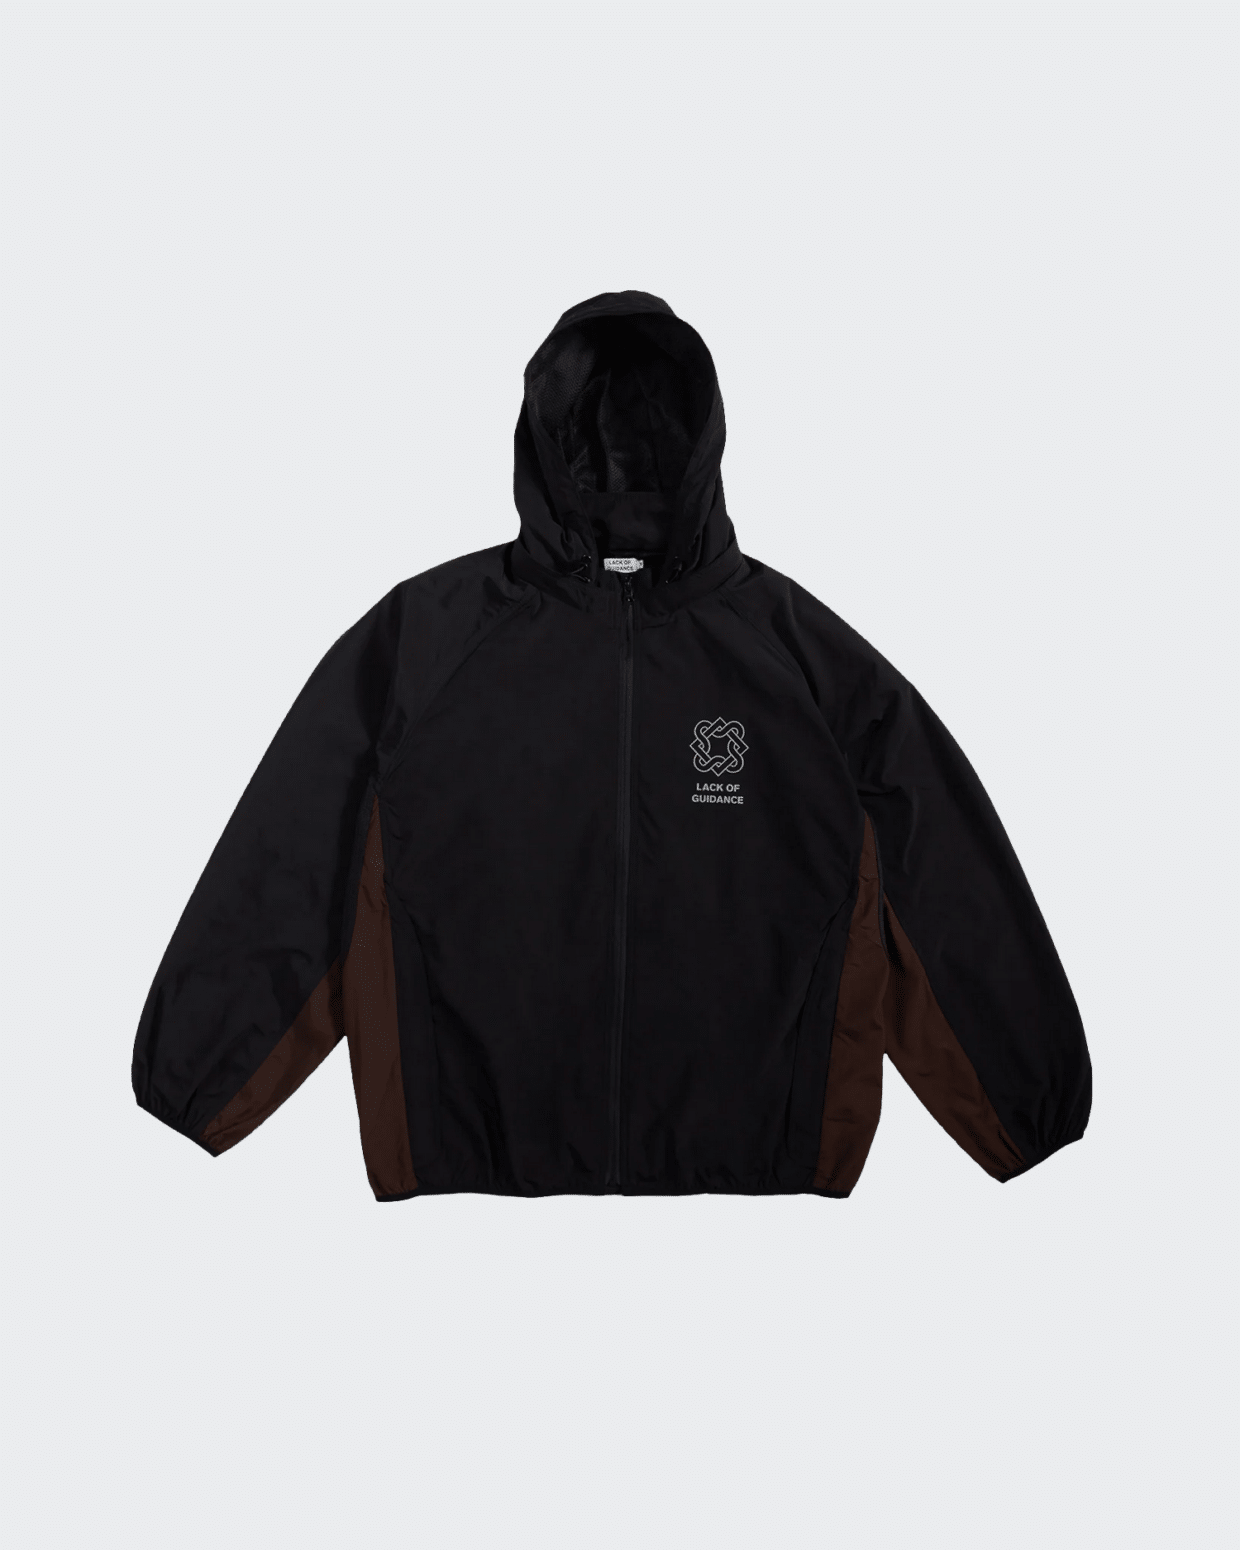 Lack Of Guidance Christian Jacket